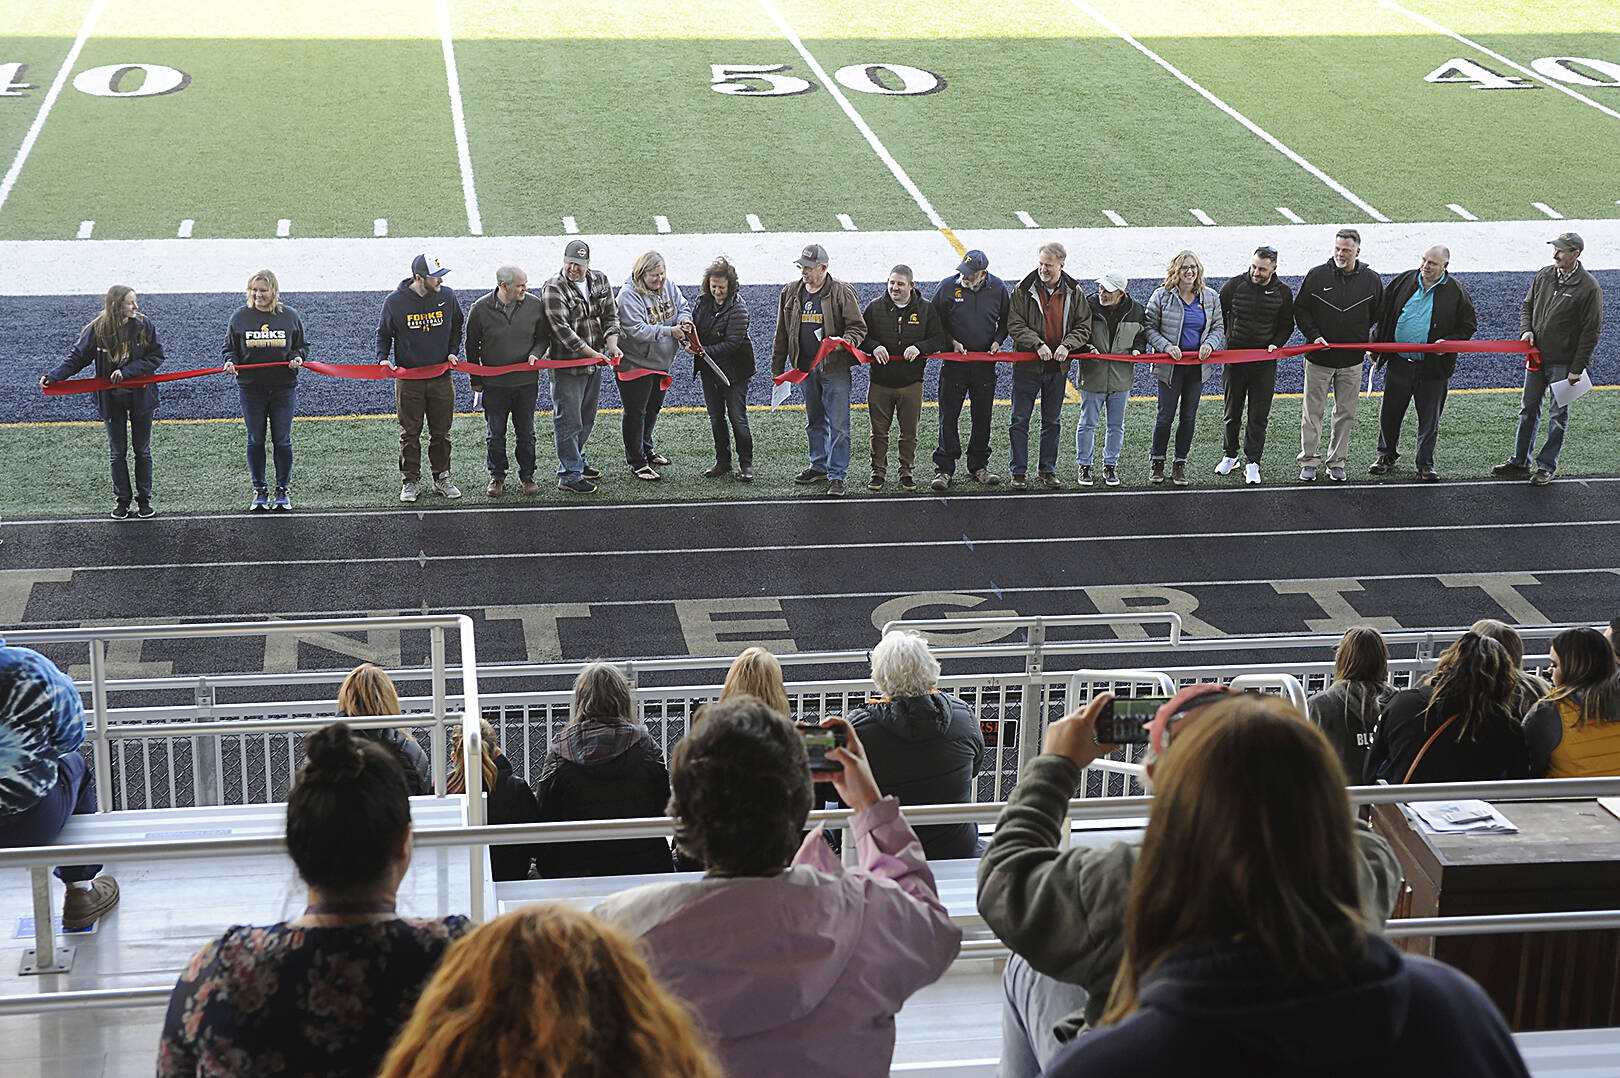 Spectators in the stands photograph the Forks Chamber of Commerce Ribbon Cutting Ceremony with cell phones during the Spartan Stadium dedication held on April 14 at the new Spartan Stadium in Forks. Photo by Lonnie Archibald